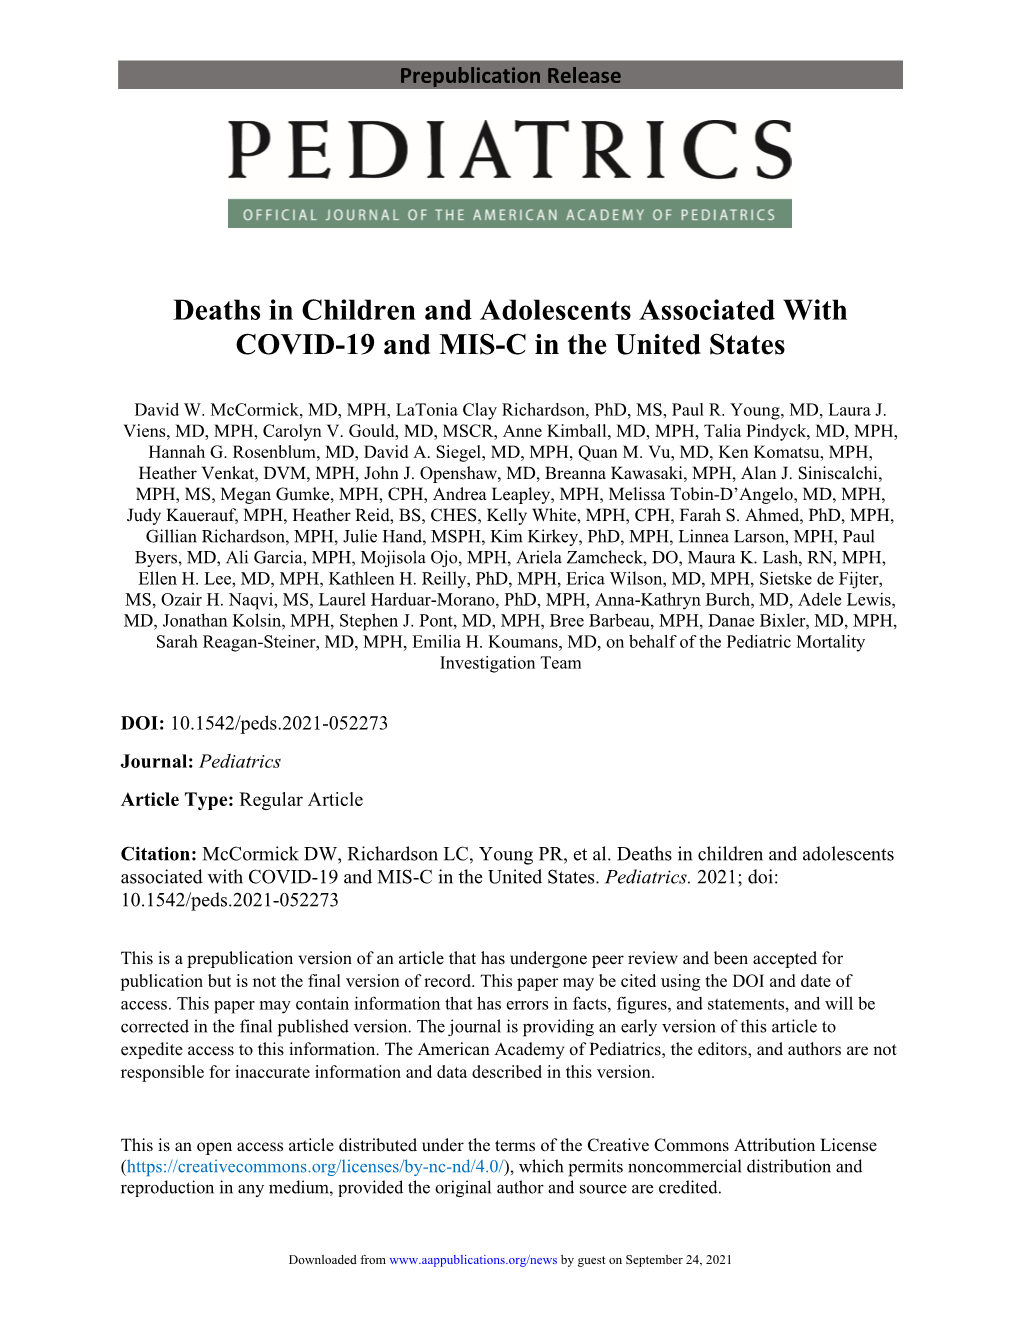 Deaths in Children and Adolescents Associated with COVID-19 and MIS-C in the United States